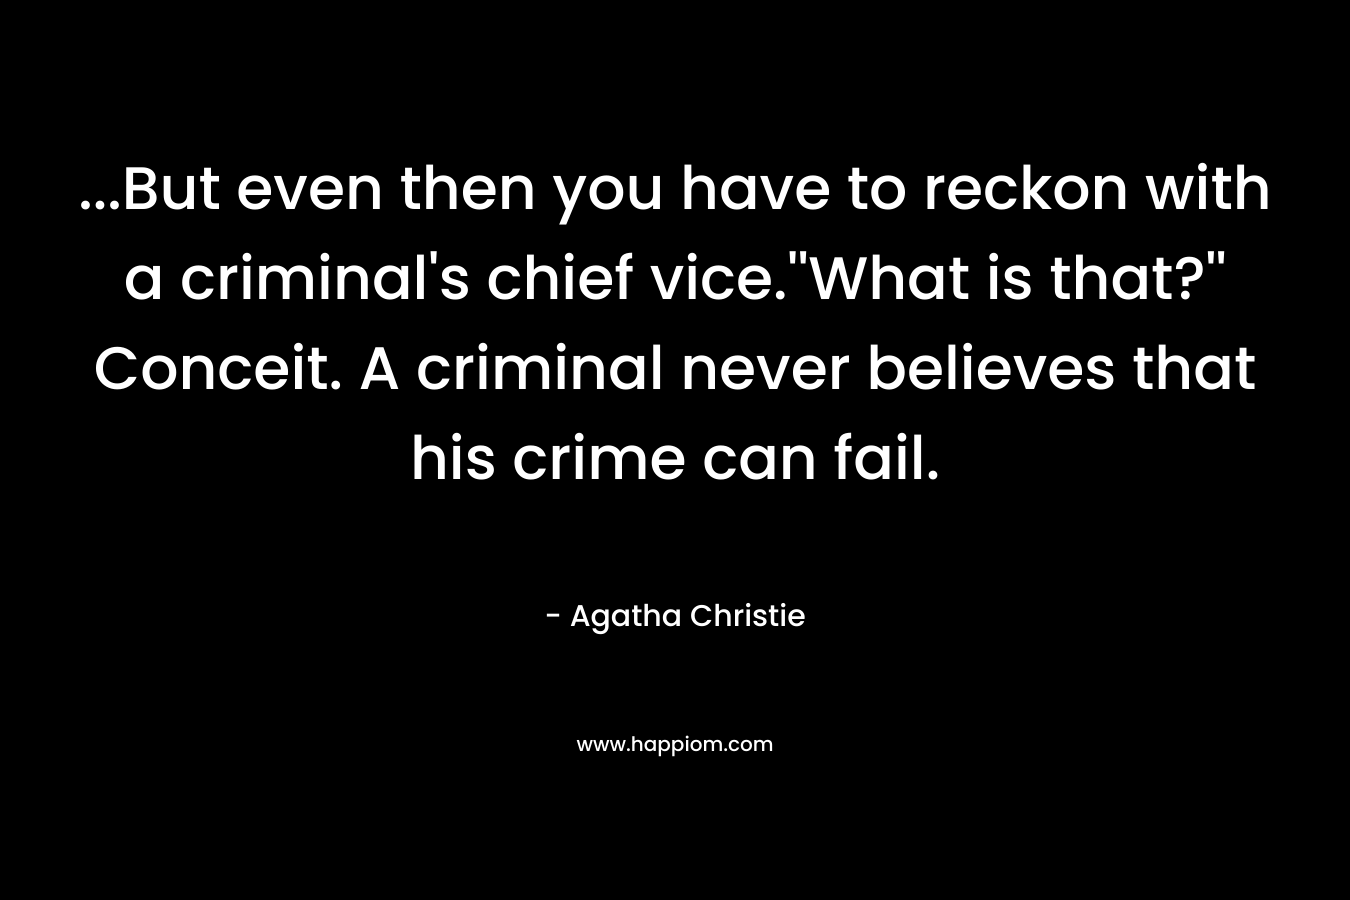 …But even then you have to reckon with a criminal’s chief vice.”What is that?” Conceit. A criminal never believes that his crime can fail. – Agatha Christie